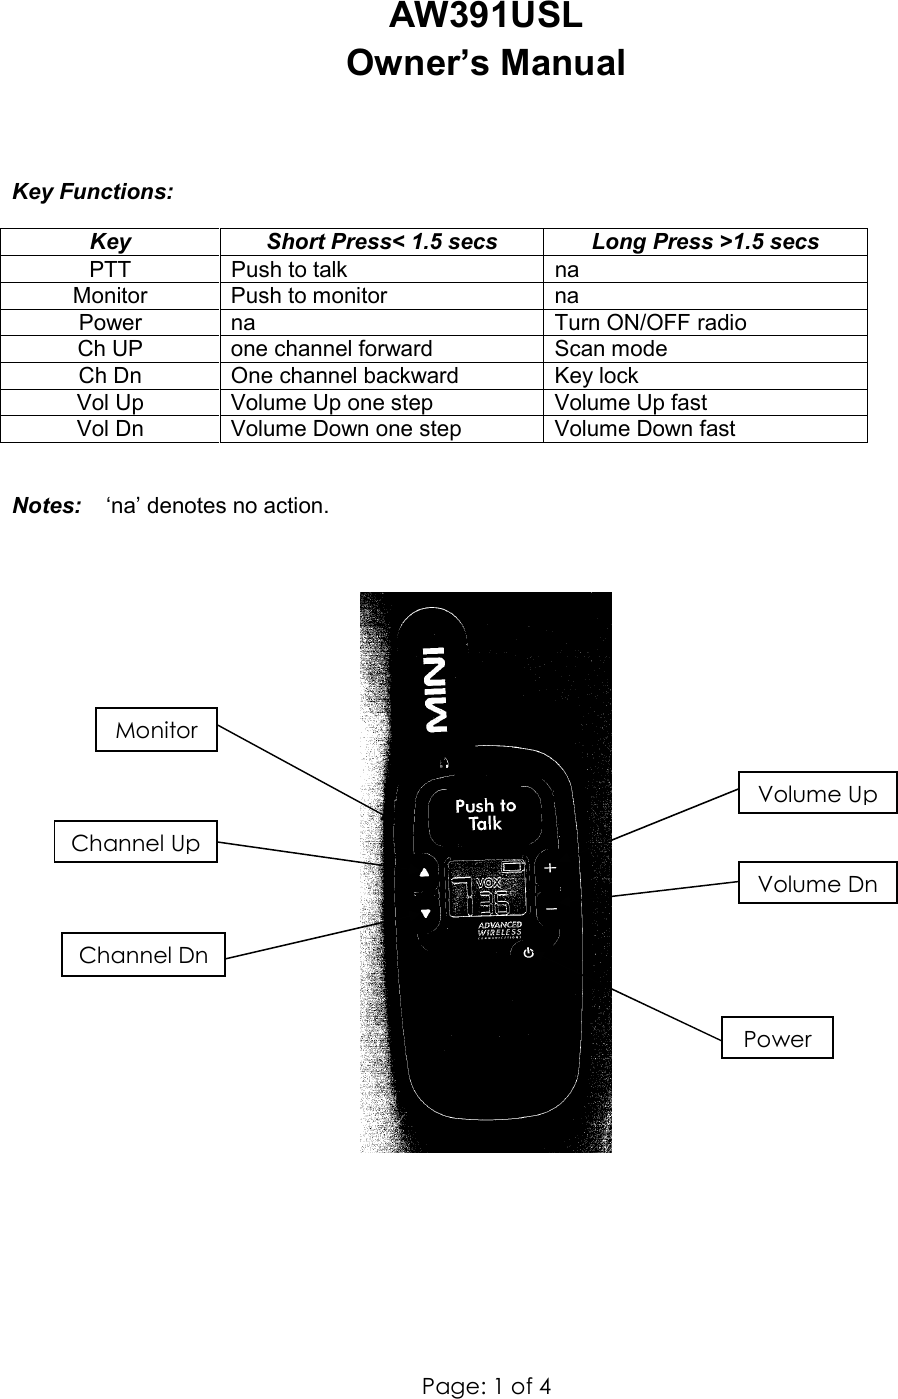  Page: 1 of 4   AW391USL  Owner’s Manual    Key Functions: Key  Short Press&lt; 1.5 secs  Long Press &gt;1.5 secs PTT  Push to talk  na Monitor  Push to monitor  na Power  na  Turn ON/OFF radio Ch UP  one channel forward  Scan mode Ch Dn  One channel backward  Key lock Vol Up  Volume Up one step  Volume Up fast Vol Dn  Volume Down one step  Volume Down fast  Notes:    ‘na’ denotes no action.    Monitor Channel Up Channel Dn Volume Up Volume Dn Power 